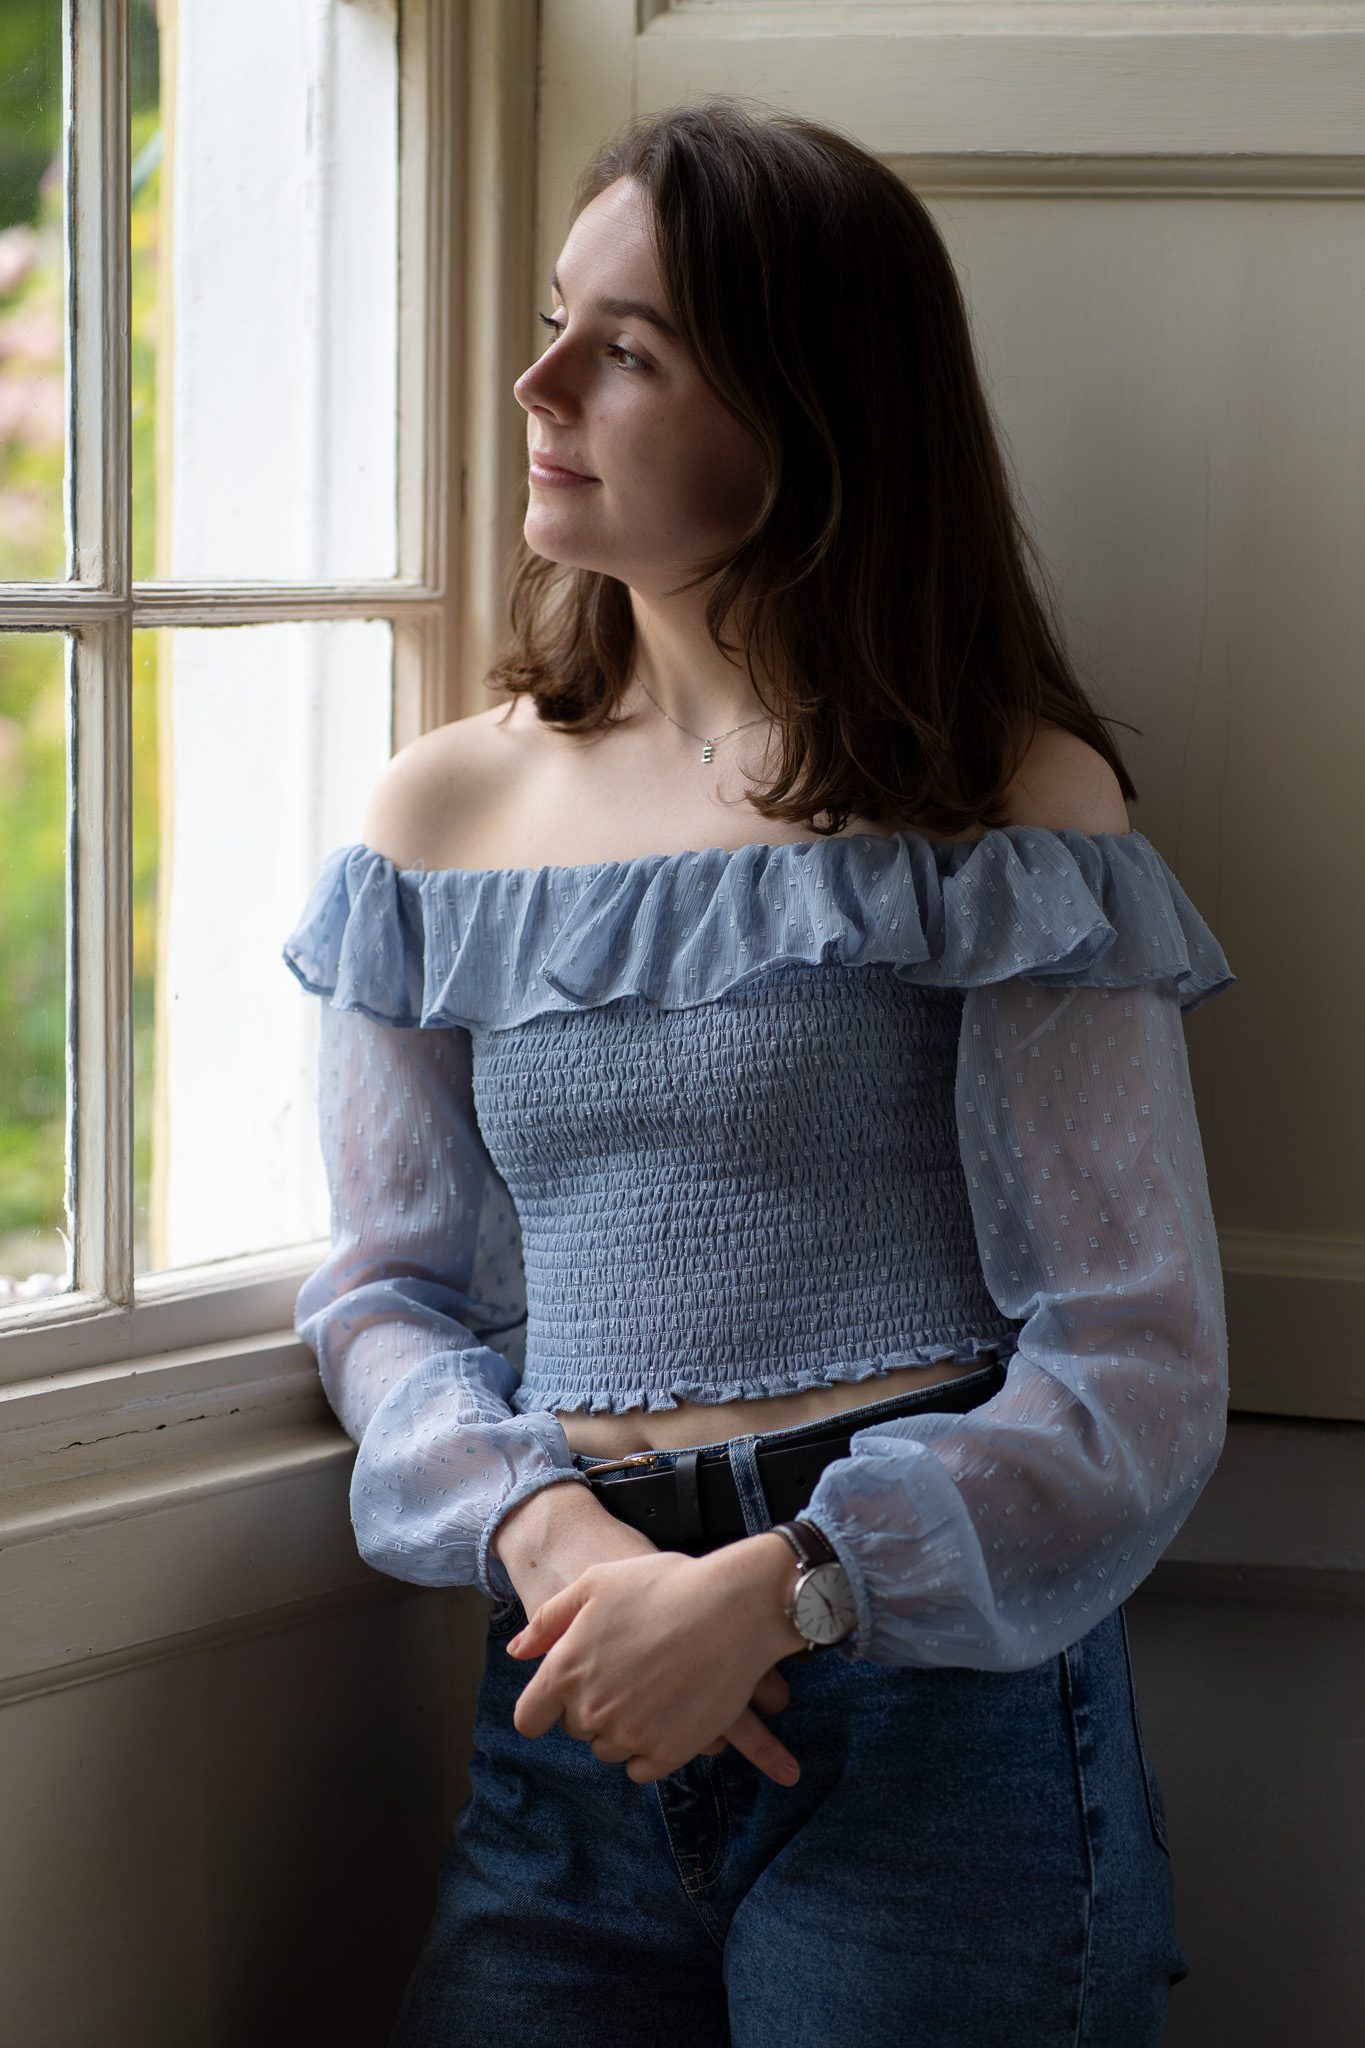 young dark-haired woman looking out of a window wearing a light blue top as she is photographed for the portraits page